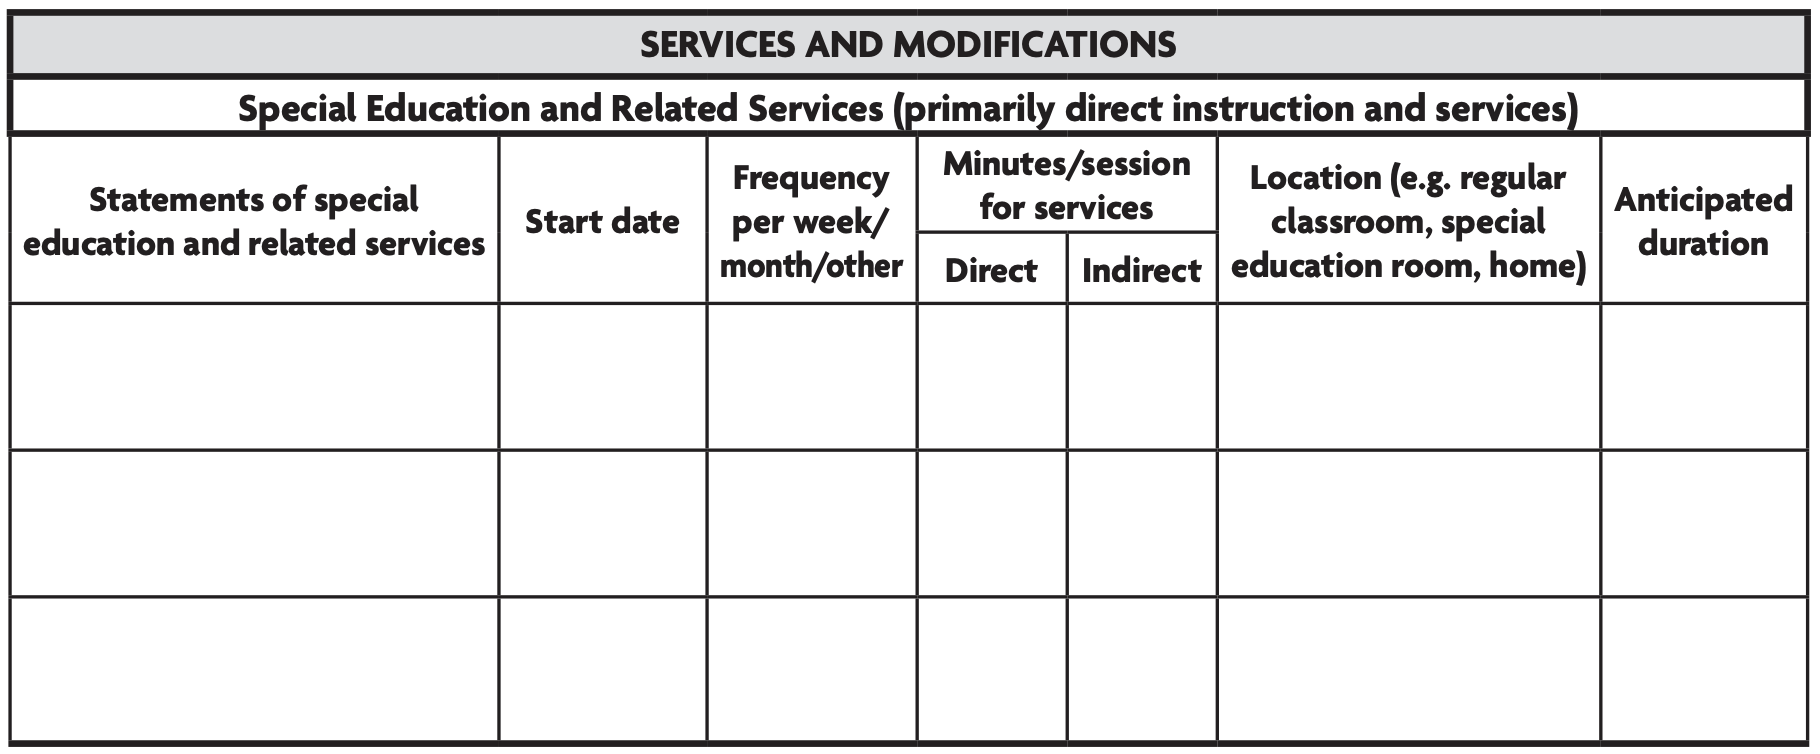 Image is a table made to be filled in with information about special education and related services with columns for start date, frequency, minutes per session, Location, and anticipated duration.